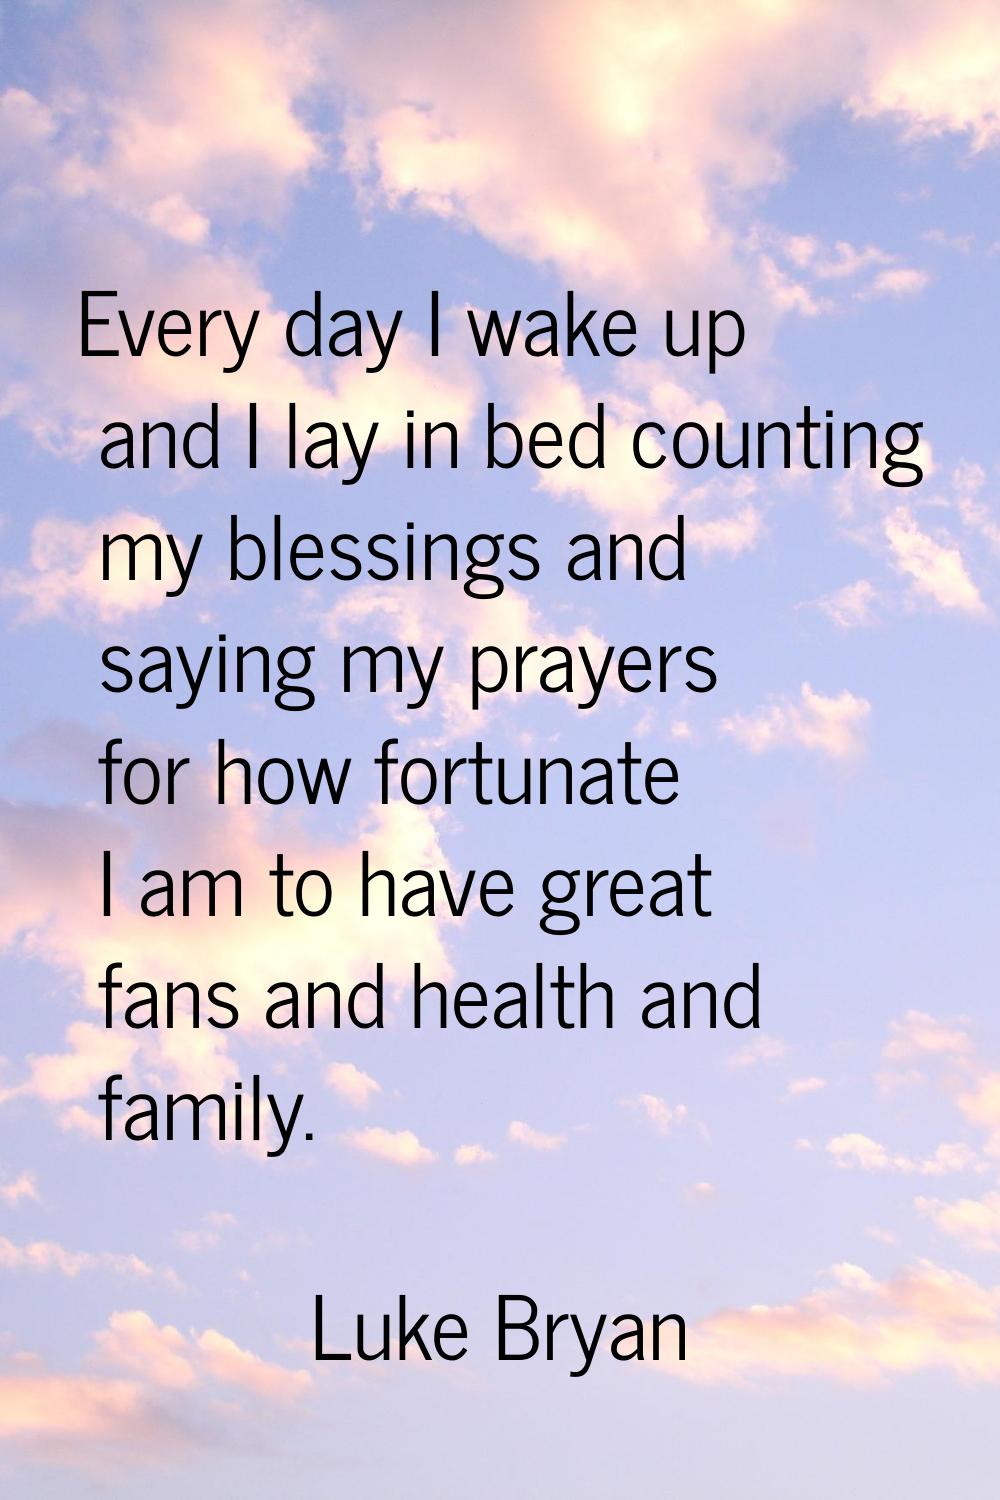 Every day I wake up and I lay in bed counting my blessings and saying my prayers for how fortunate 